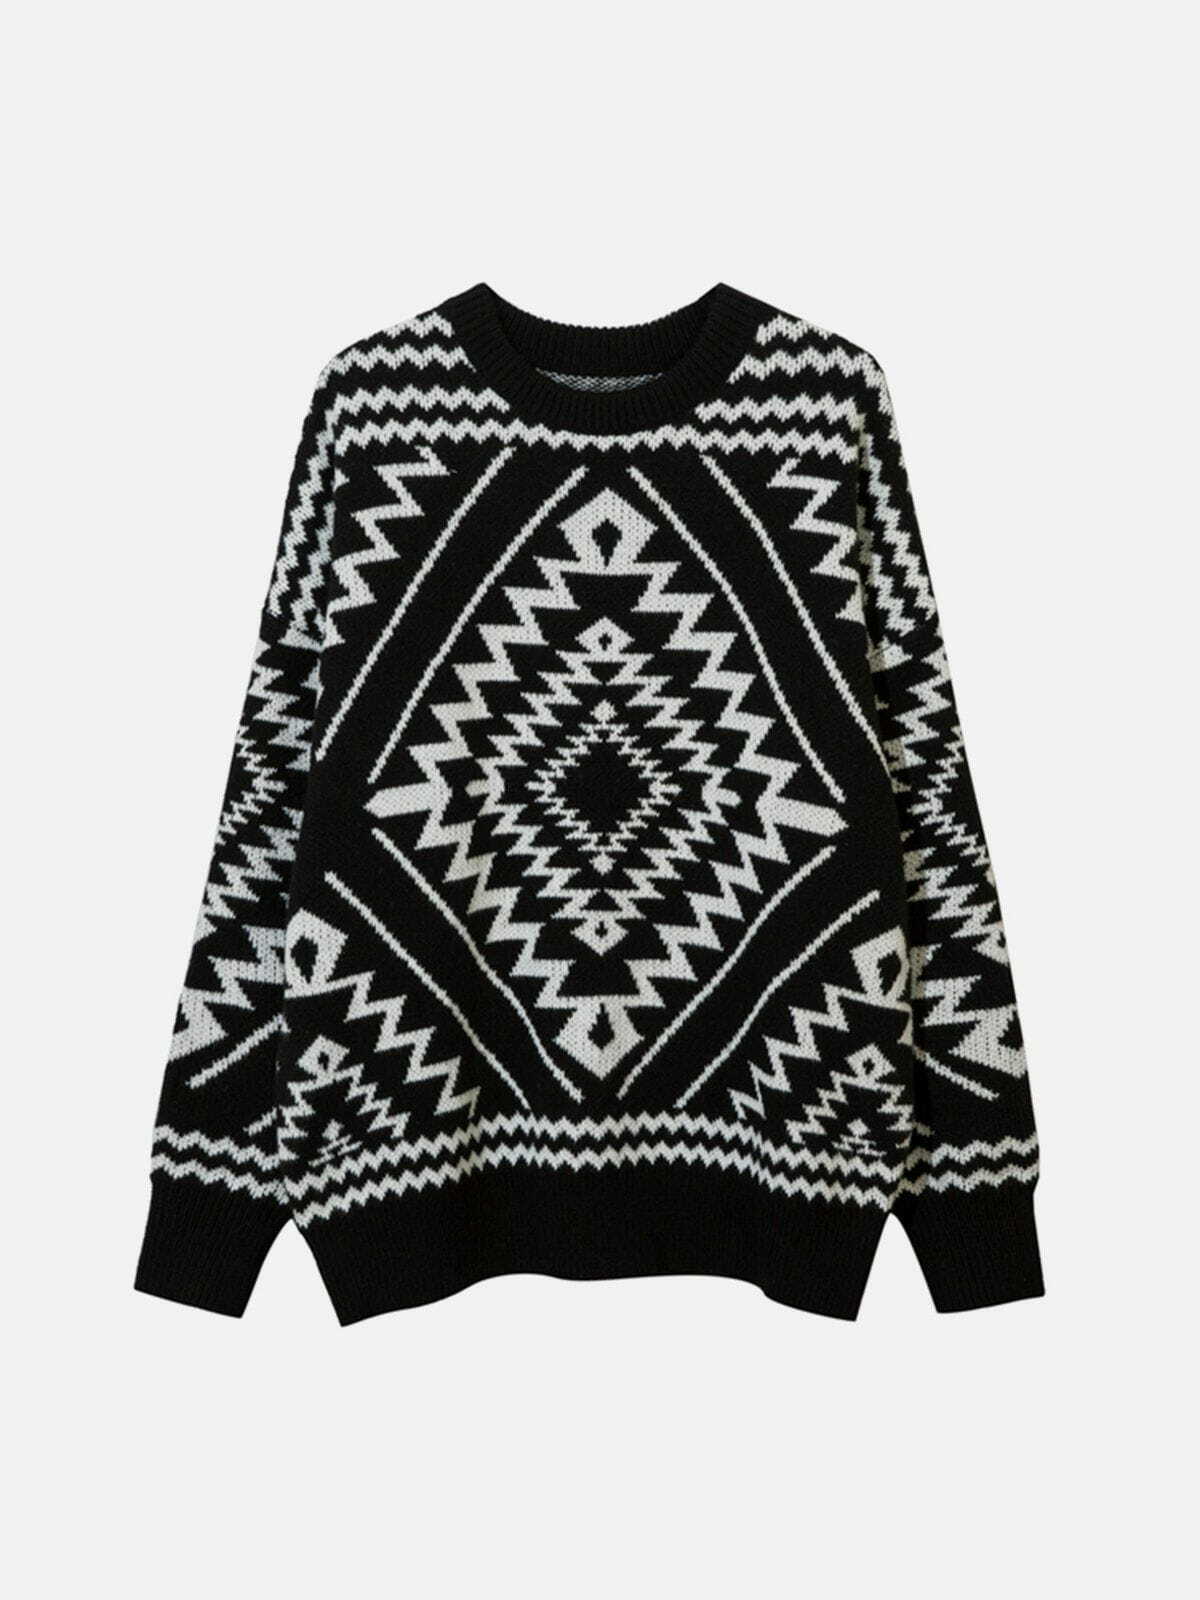 totem print graphic sweater edgy y2k streetwear 7074